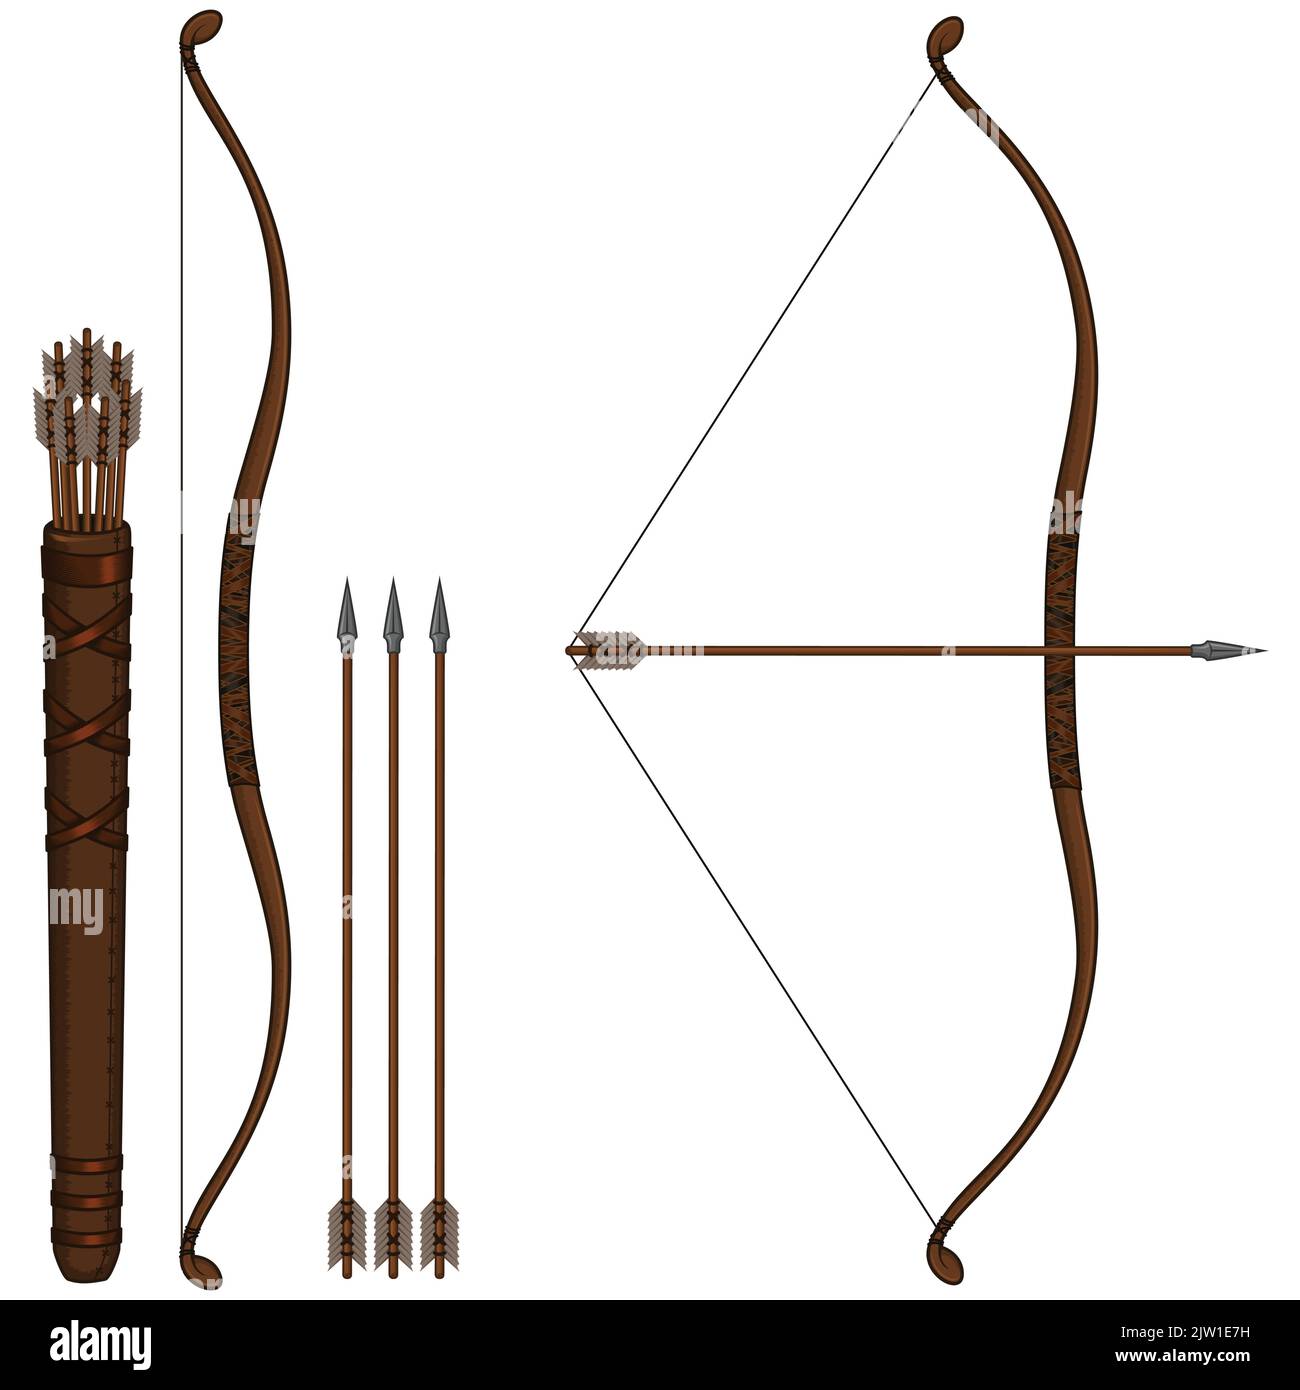 Archery kit vector design for target shooting, Bow Arrow Quiver illustration Stock Vector